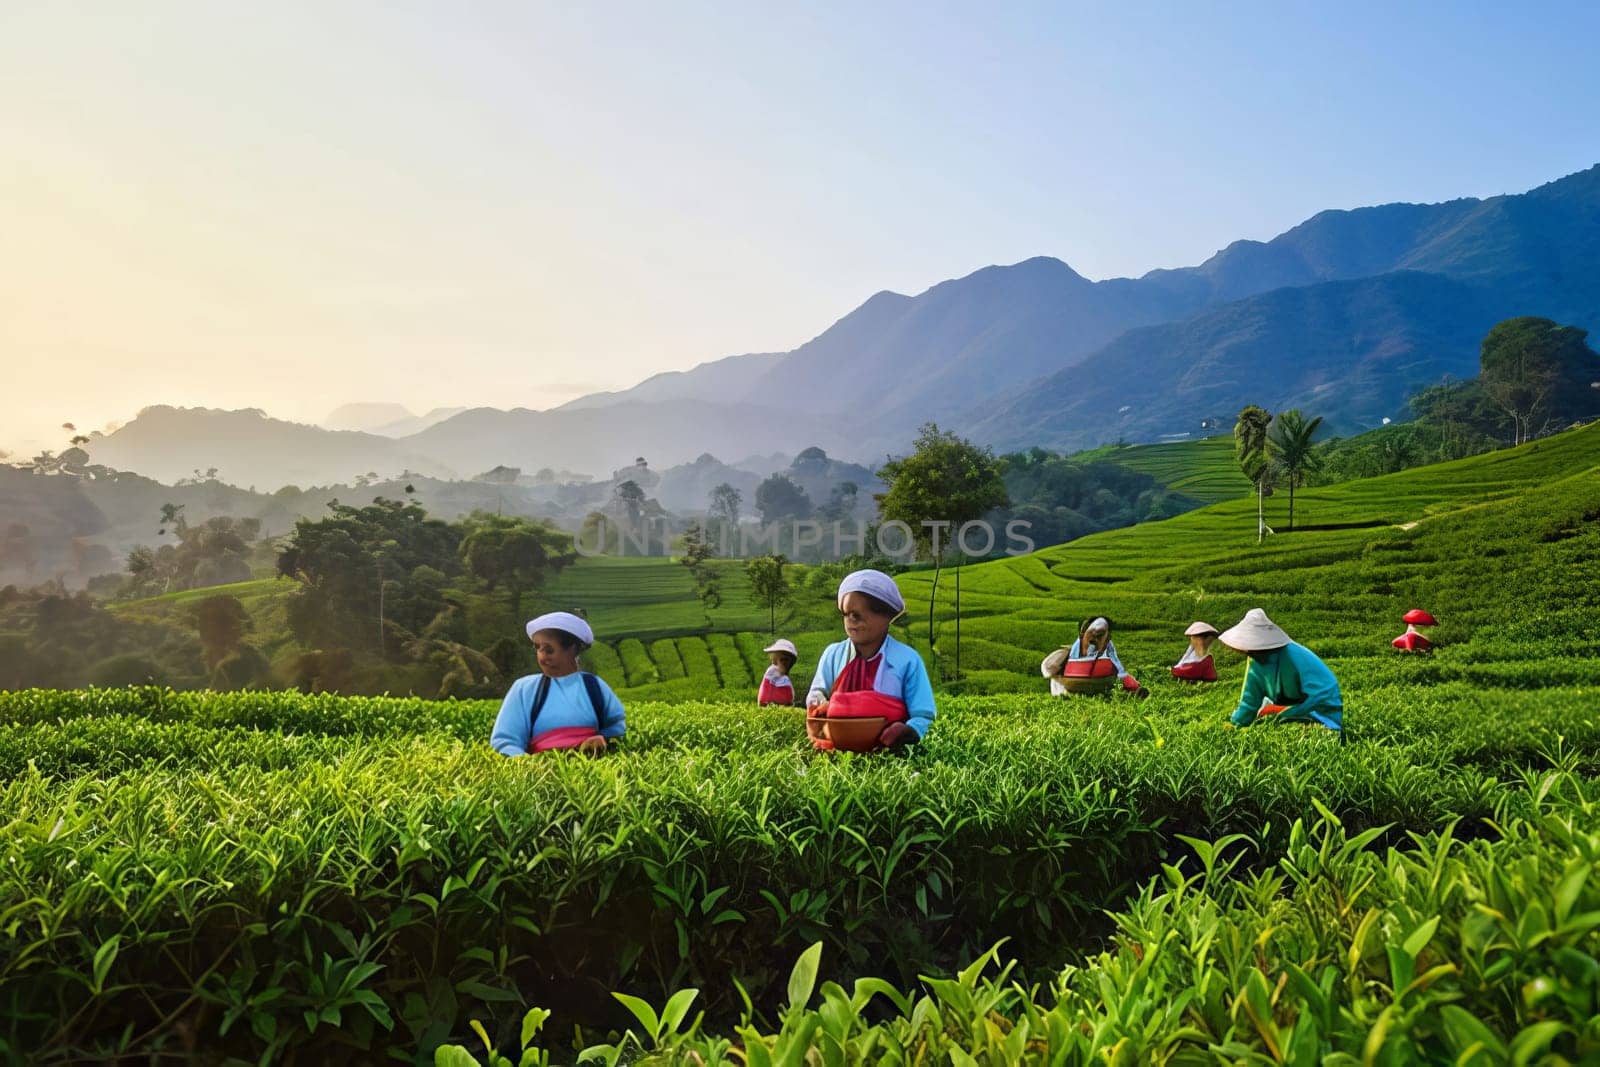 Delight in the peaceful ambiance of traditional tea-picking in lush green terraces at sunrise, radiating with the gentle glow of the early sun